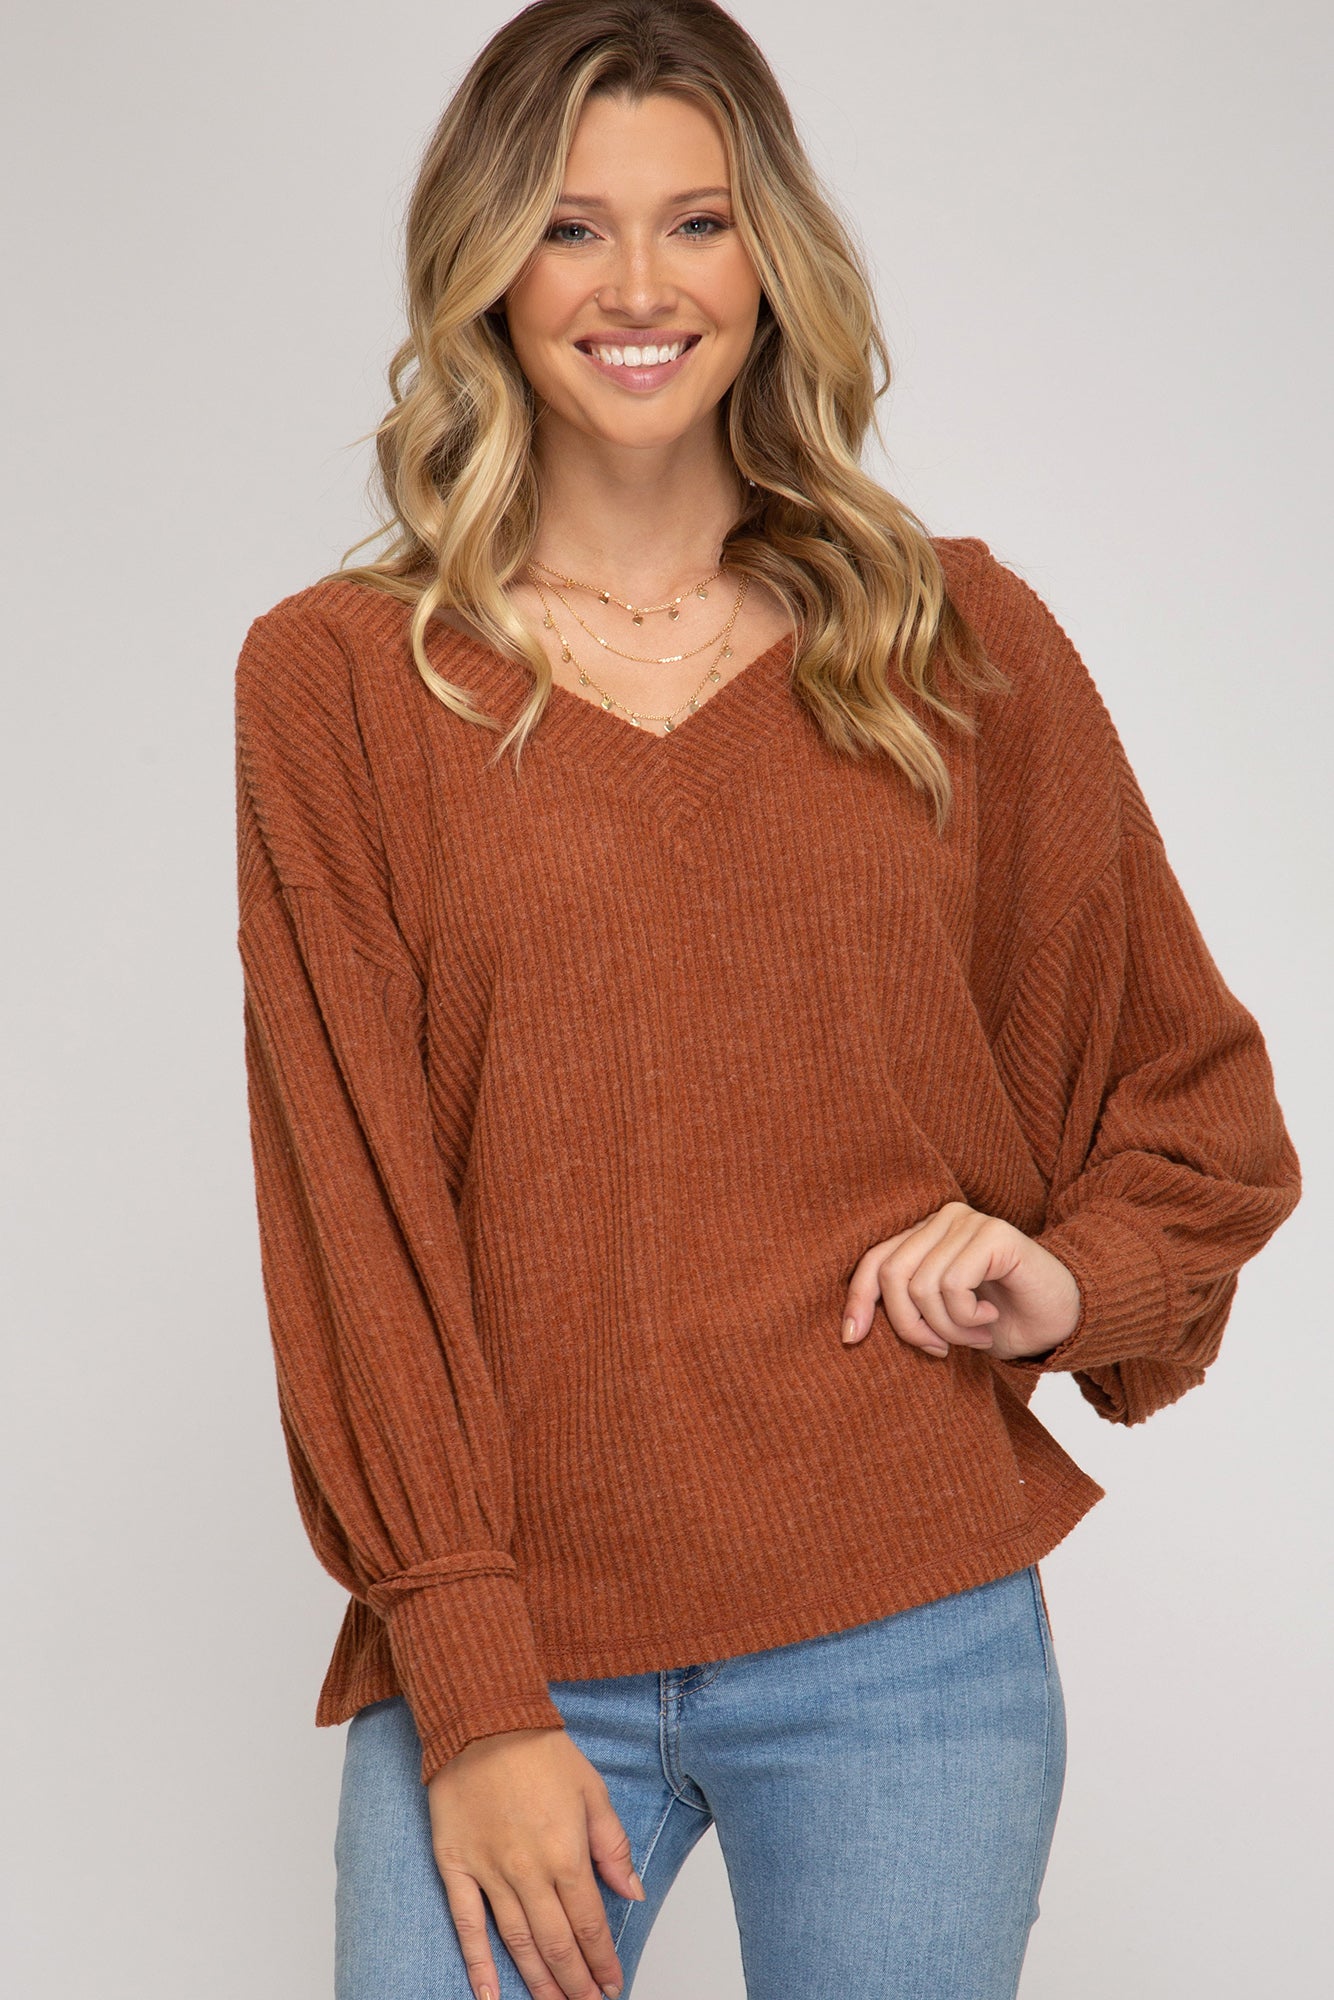 Long Sleeve Top With Brush Rib Knit Material!